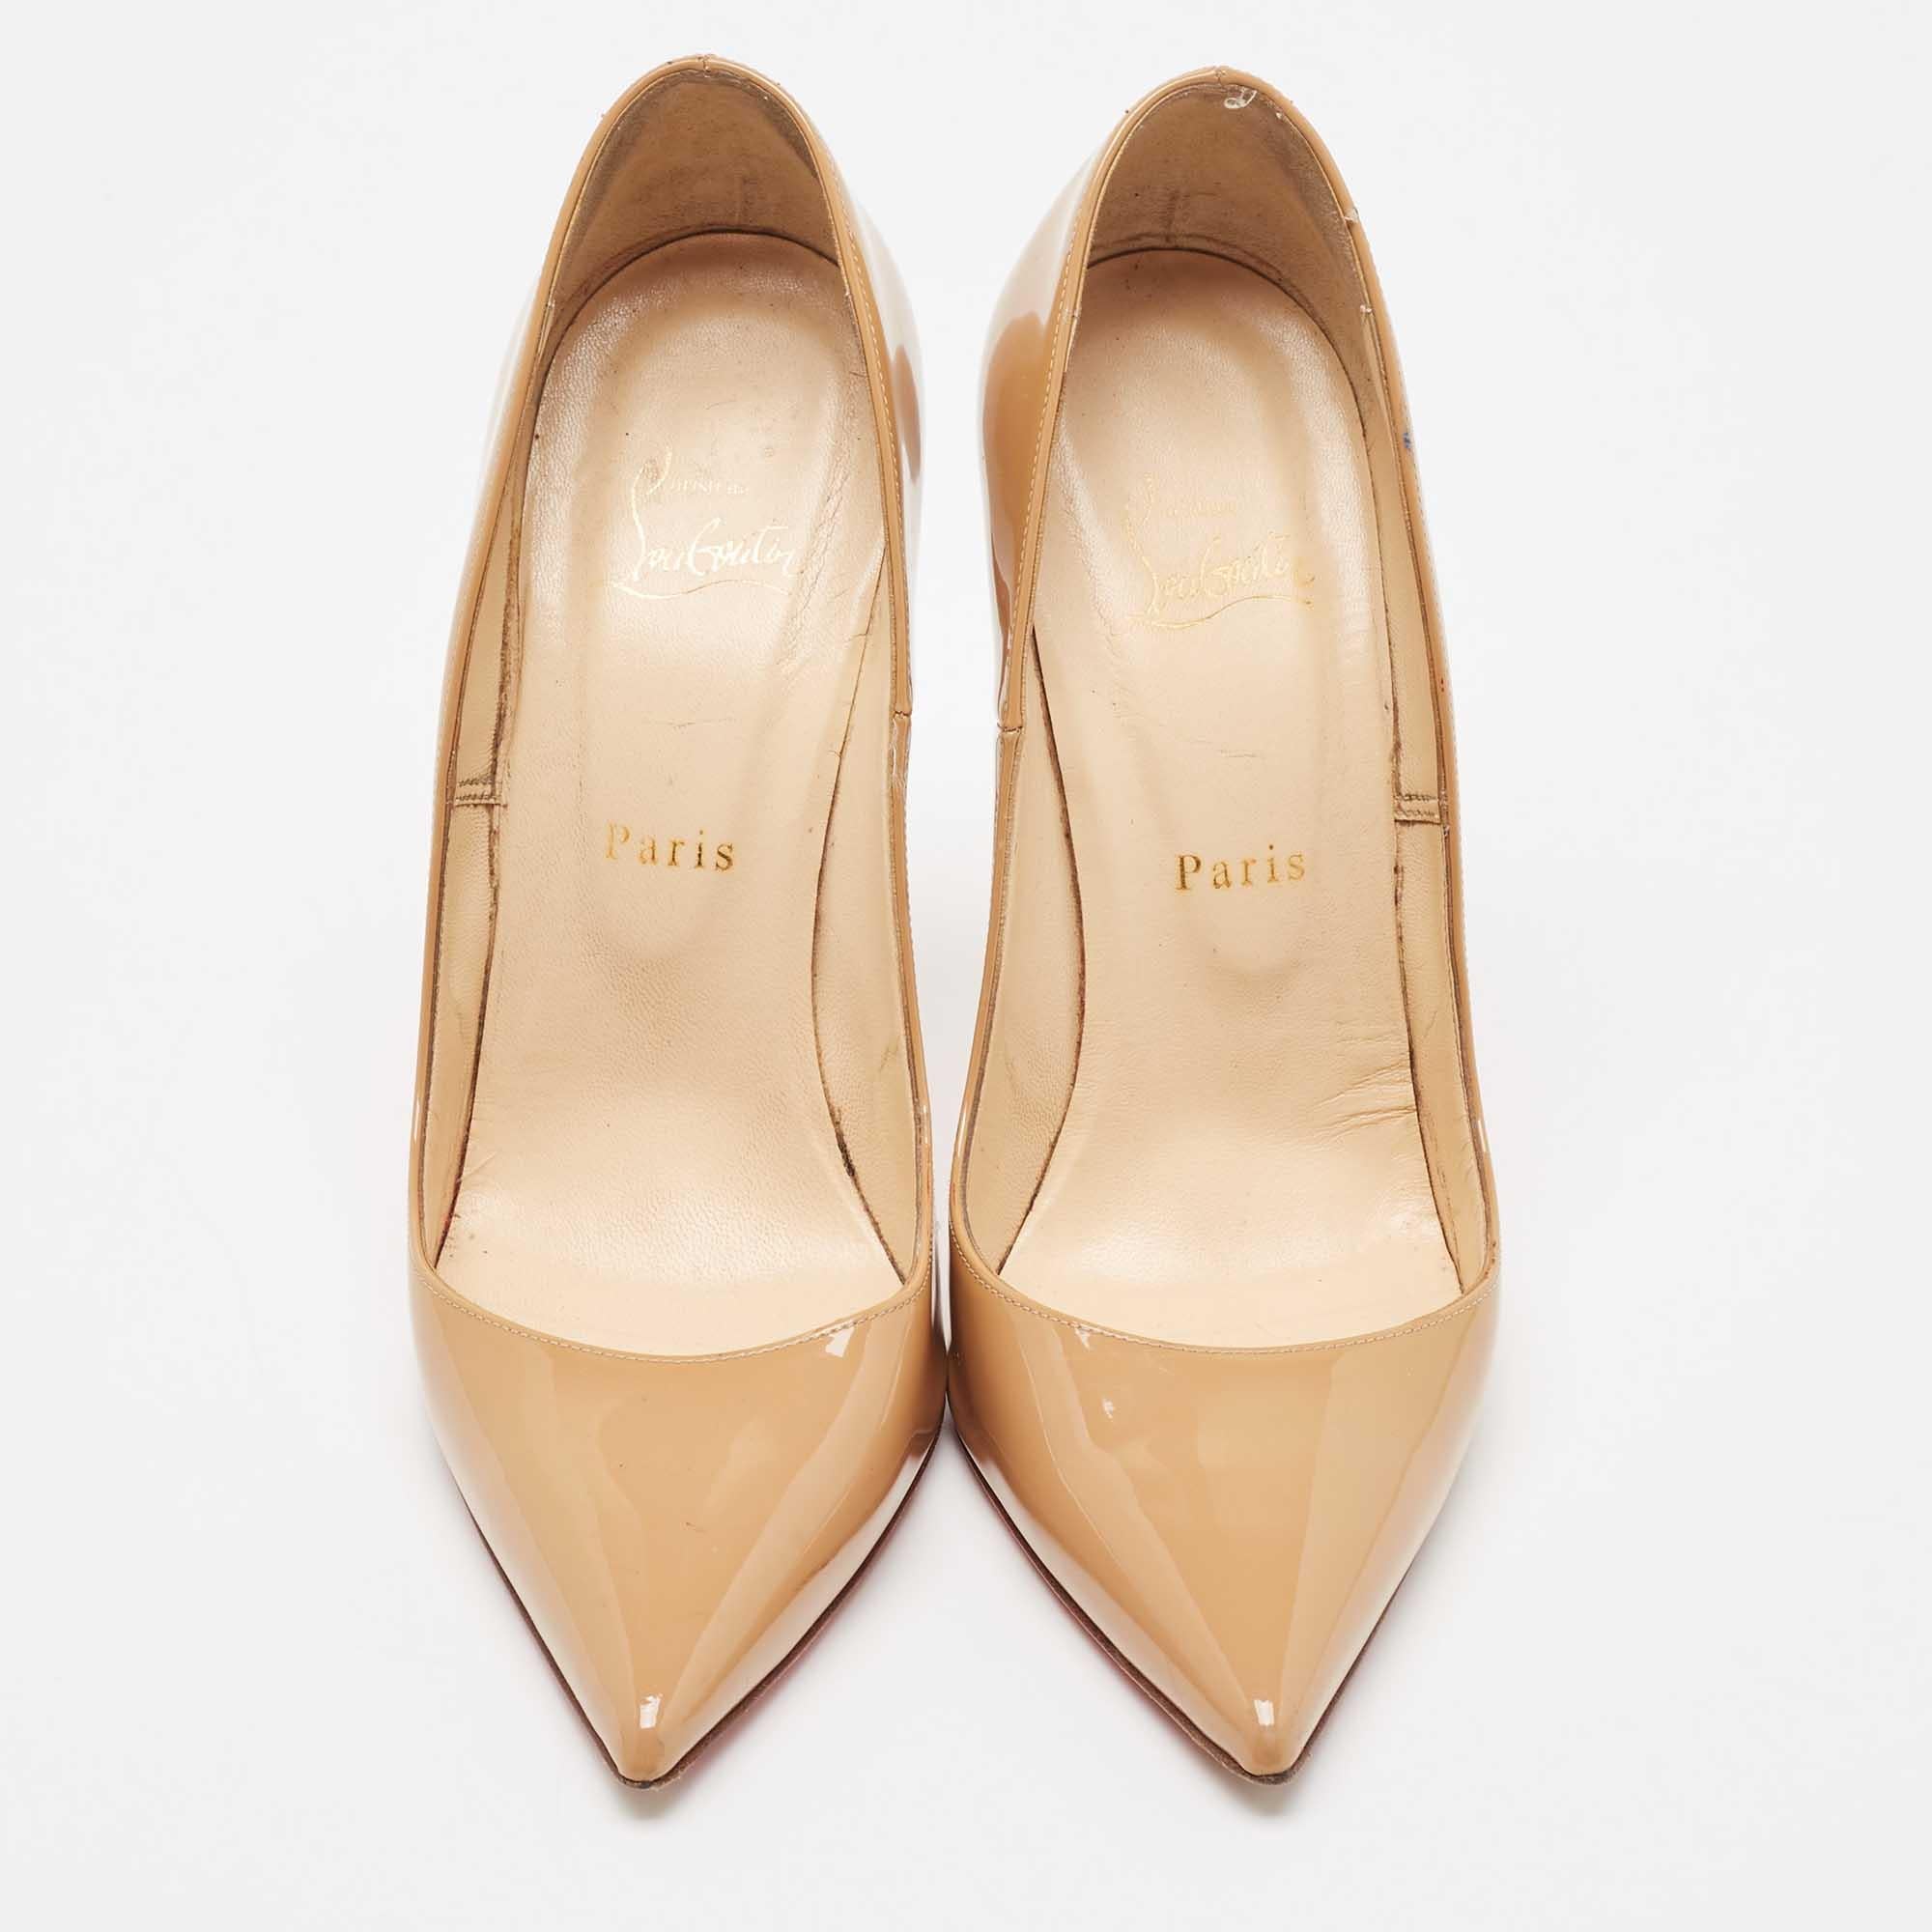 Women's Christian Louboutin Beige Patent Leather So Kate Pumps Size 40